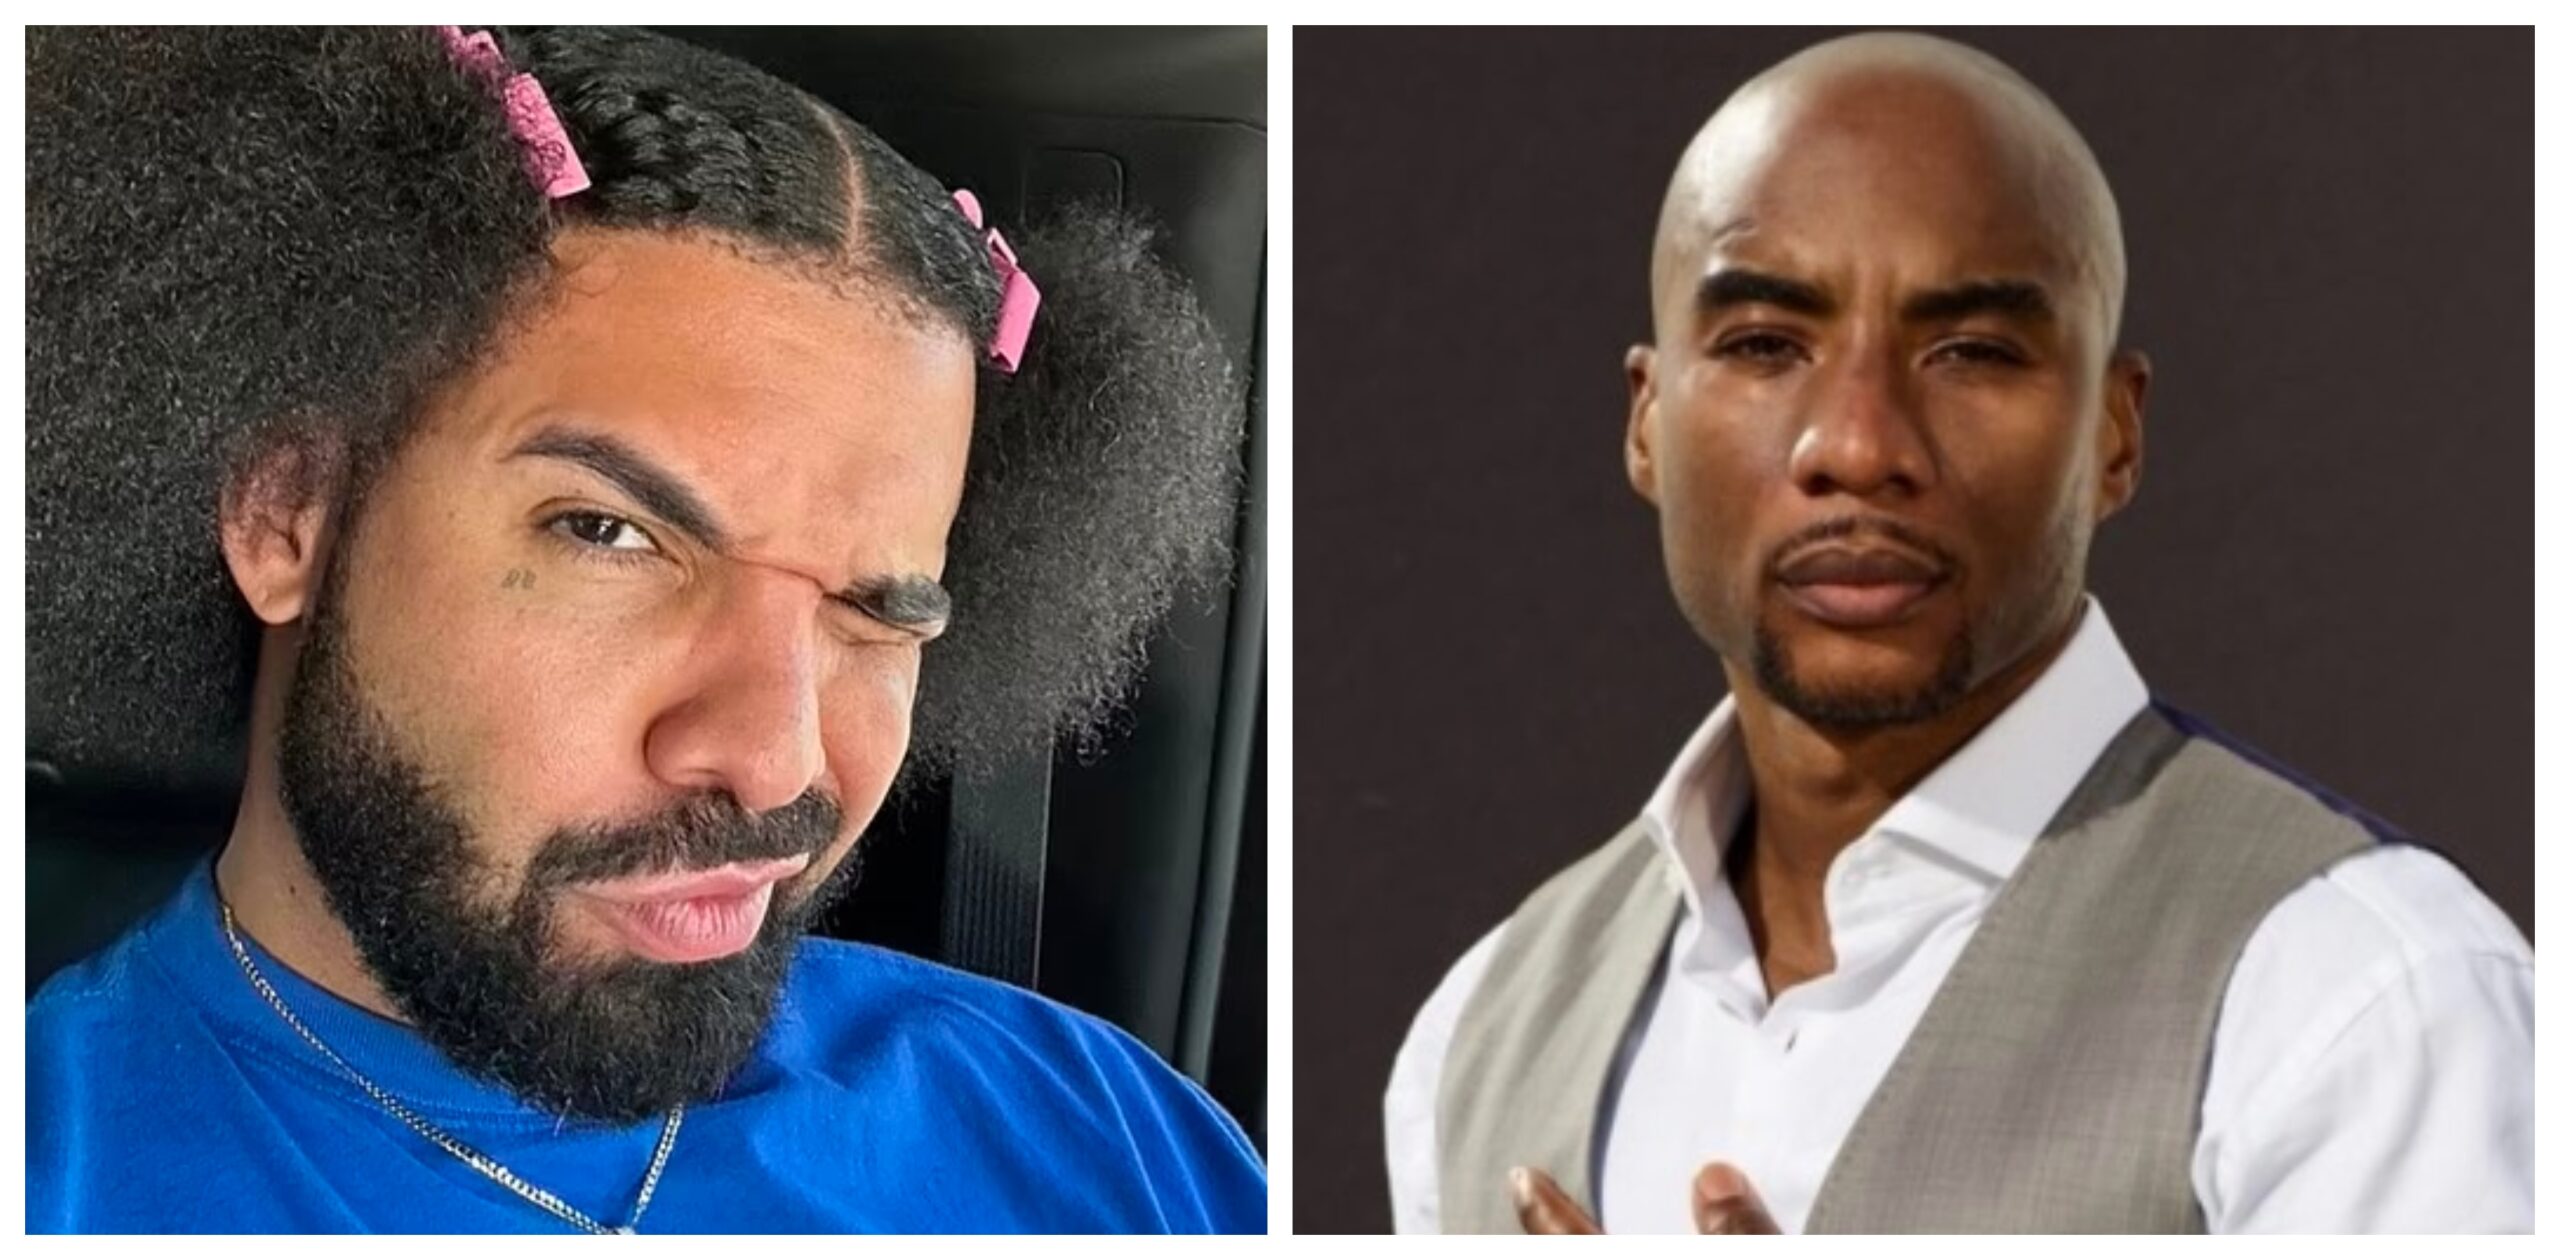 “You’re Obsessed with Me”: Drake Hits Back at “Goof” Charlamagne Tha God